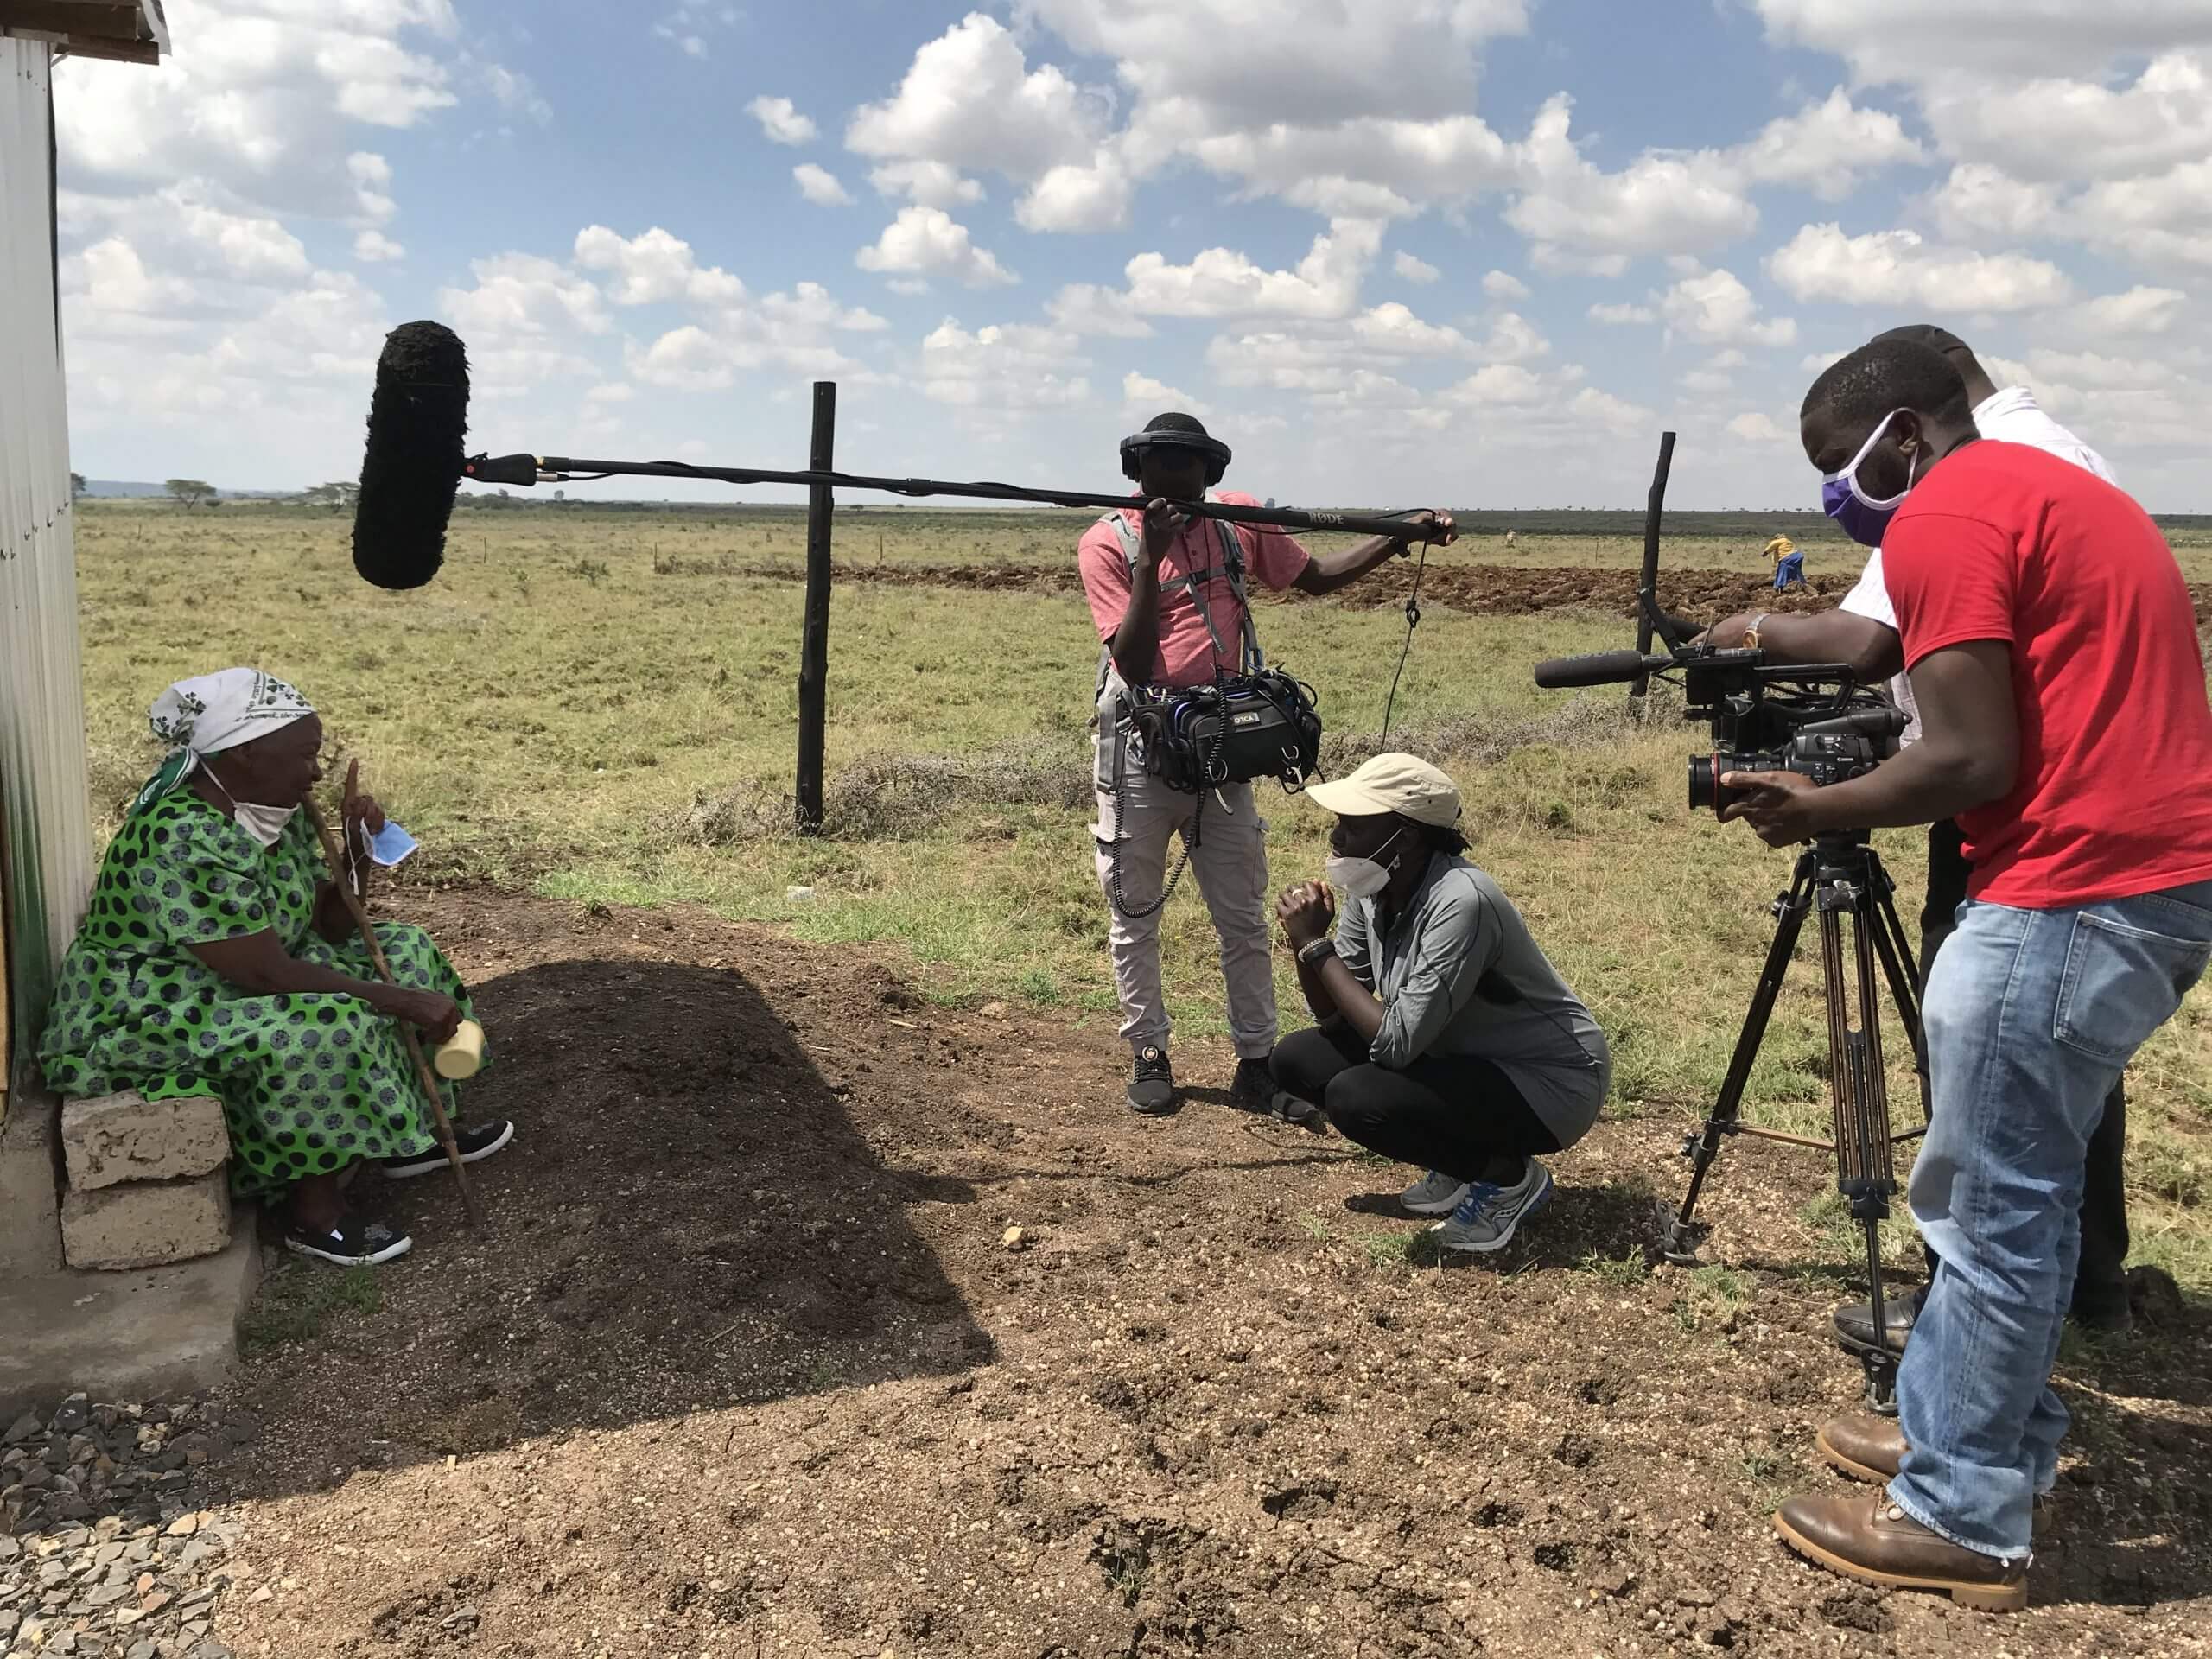 One gaffer and one DP stand on either side of Zippy Kimundu in the middle of an open plain. All three face a woman to the left left who is seated and wearing a long green dress.